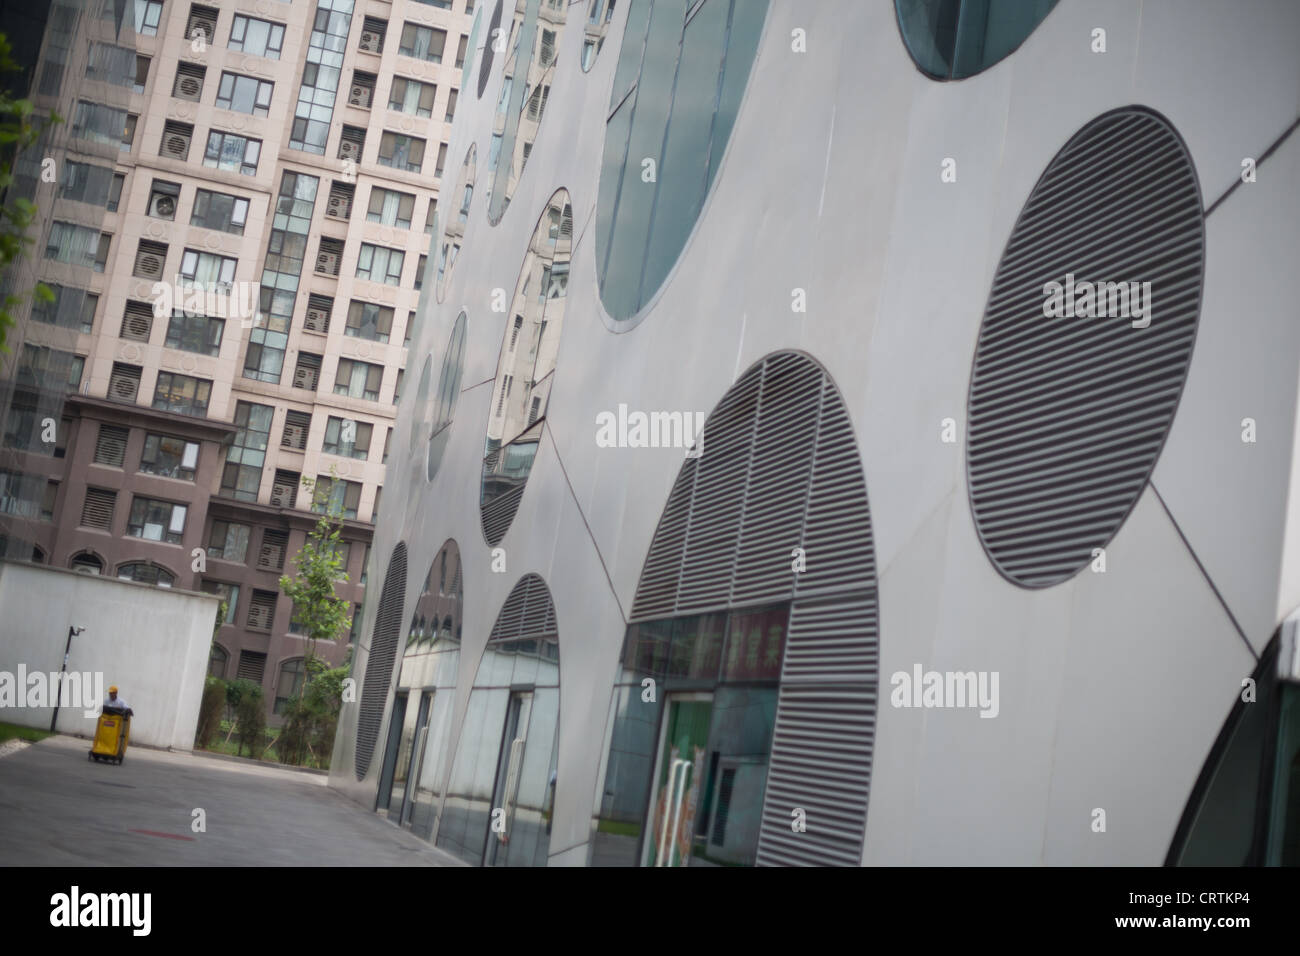 Old and new exterior architecture design in Beijing, China. Stock Photo